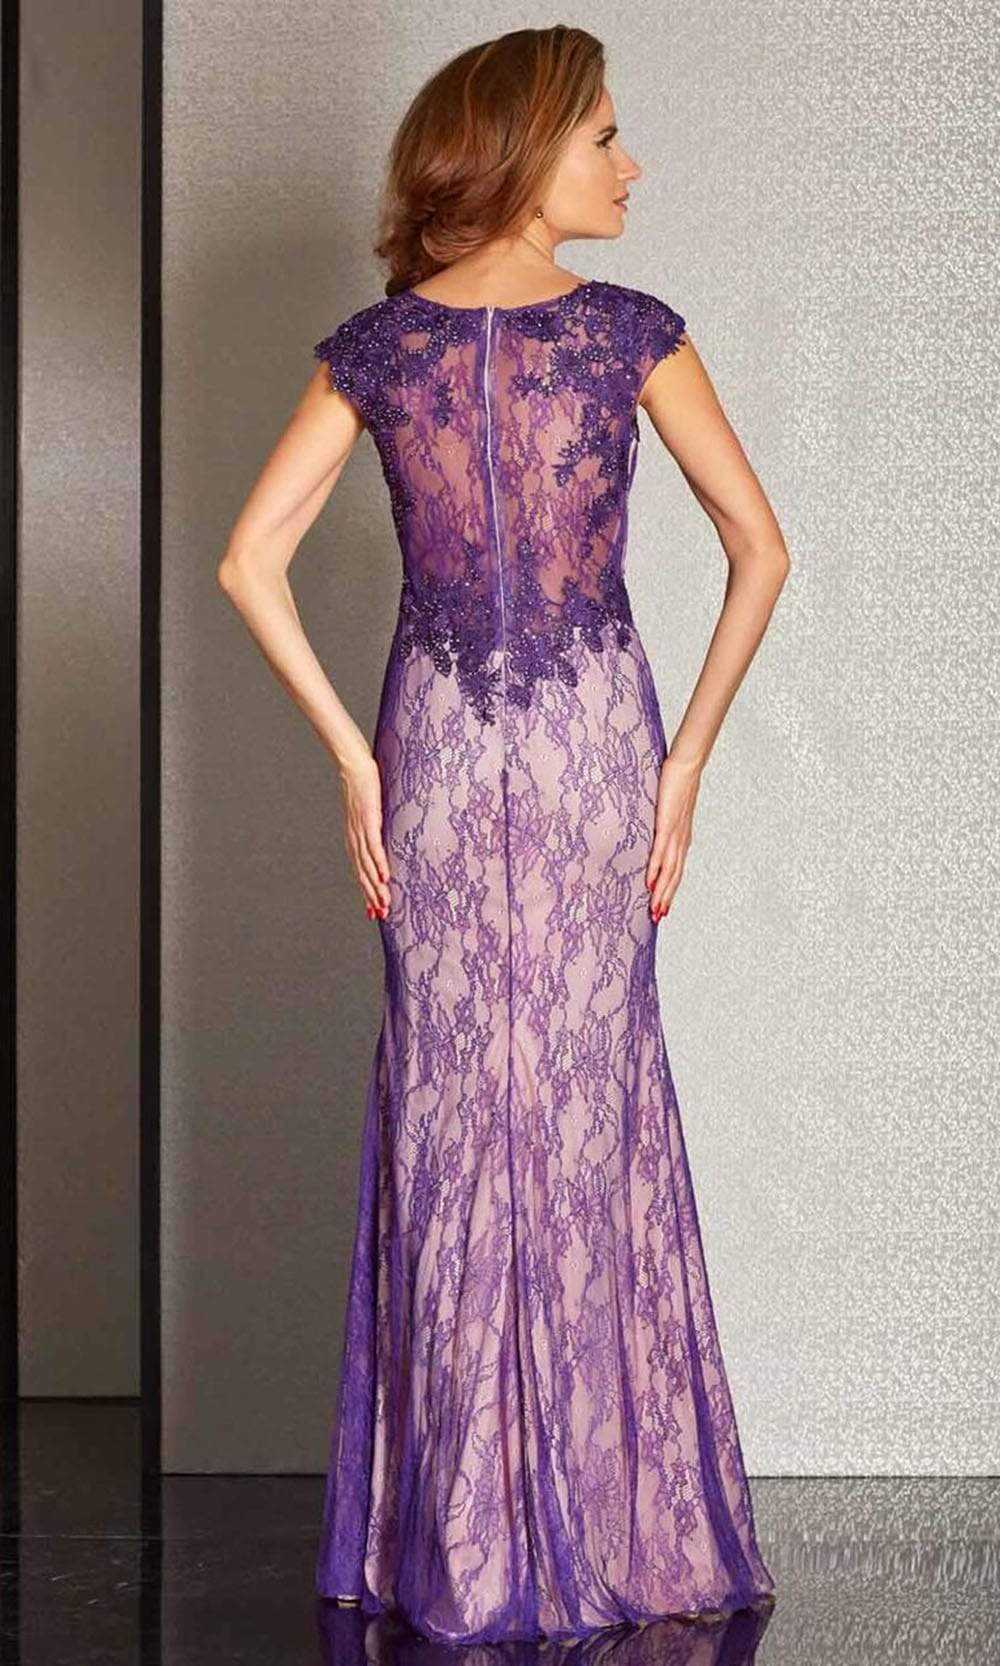 Clarisse, Clarisse - Illusion Jewel Lace Trumpet Gown M6236 - 1 pc Purple/Nude In Size 6 Available